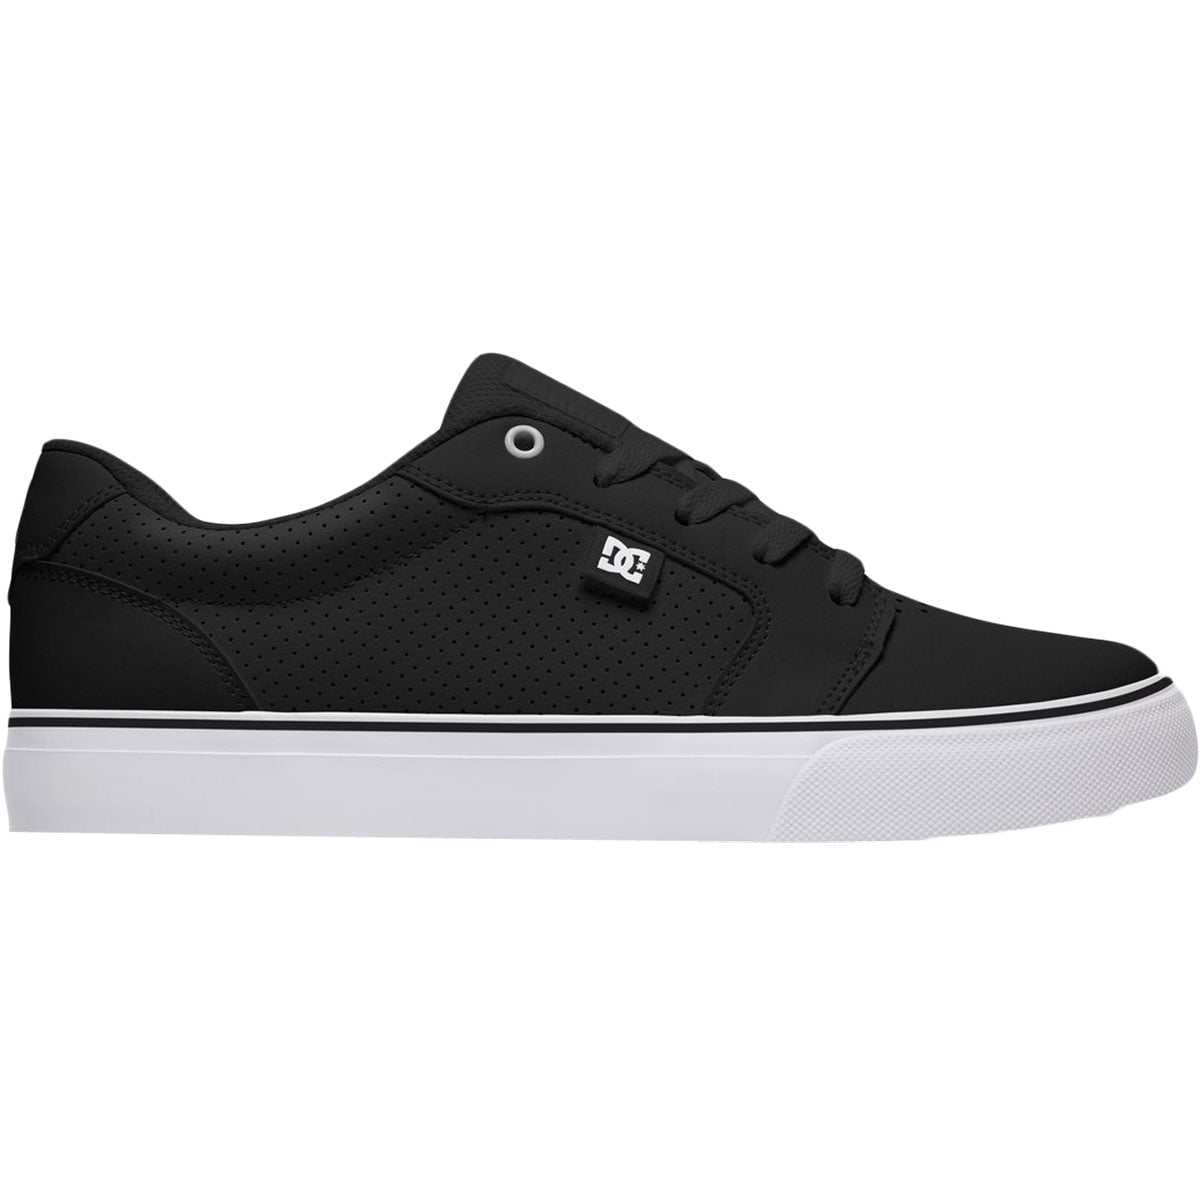 ADYS300147 DC Shoes Men's Casual / Skating Leather Classic Black Anvil SE 